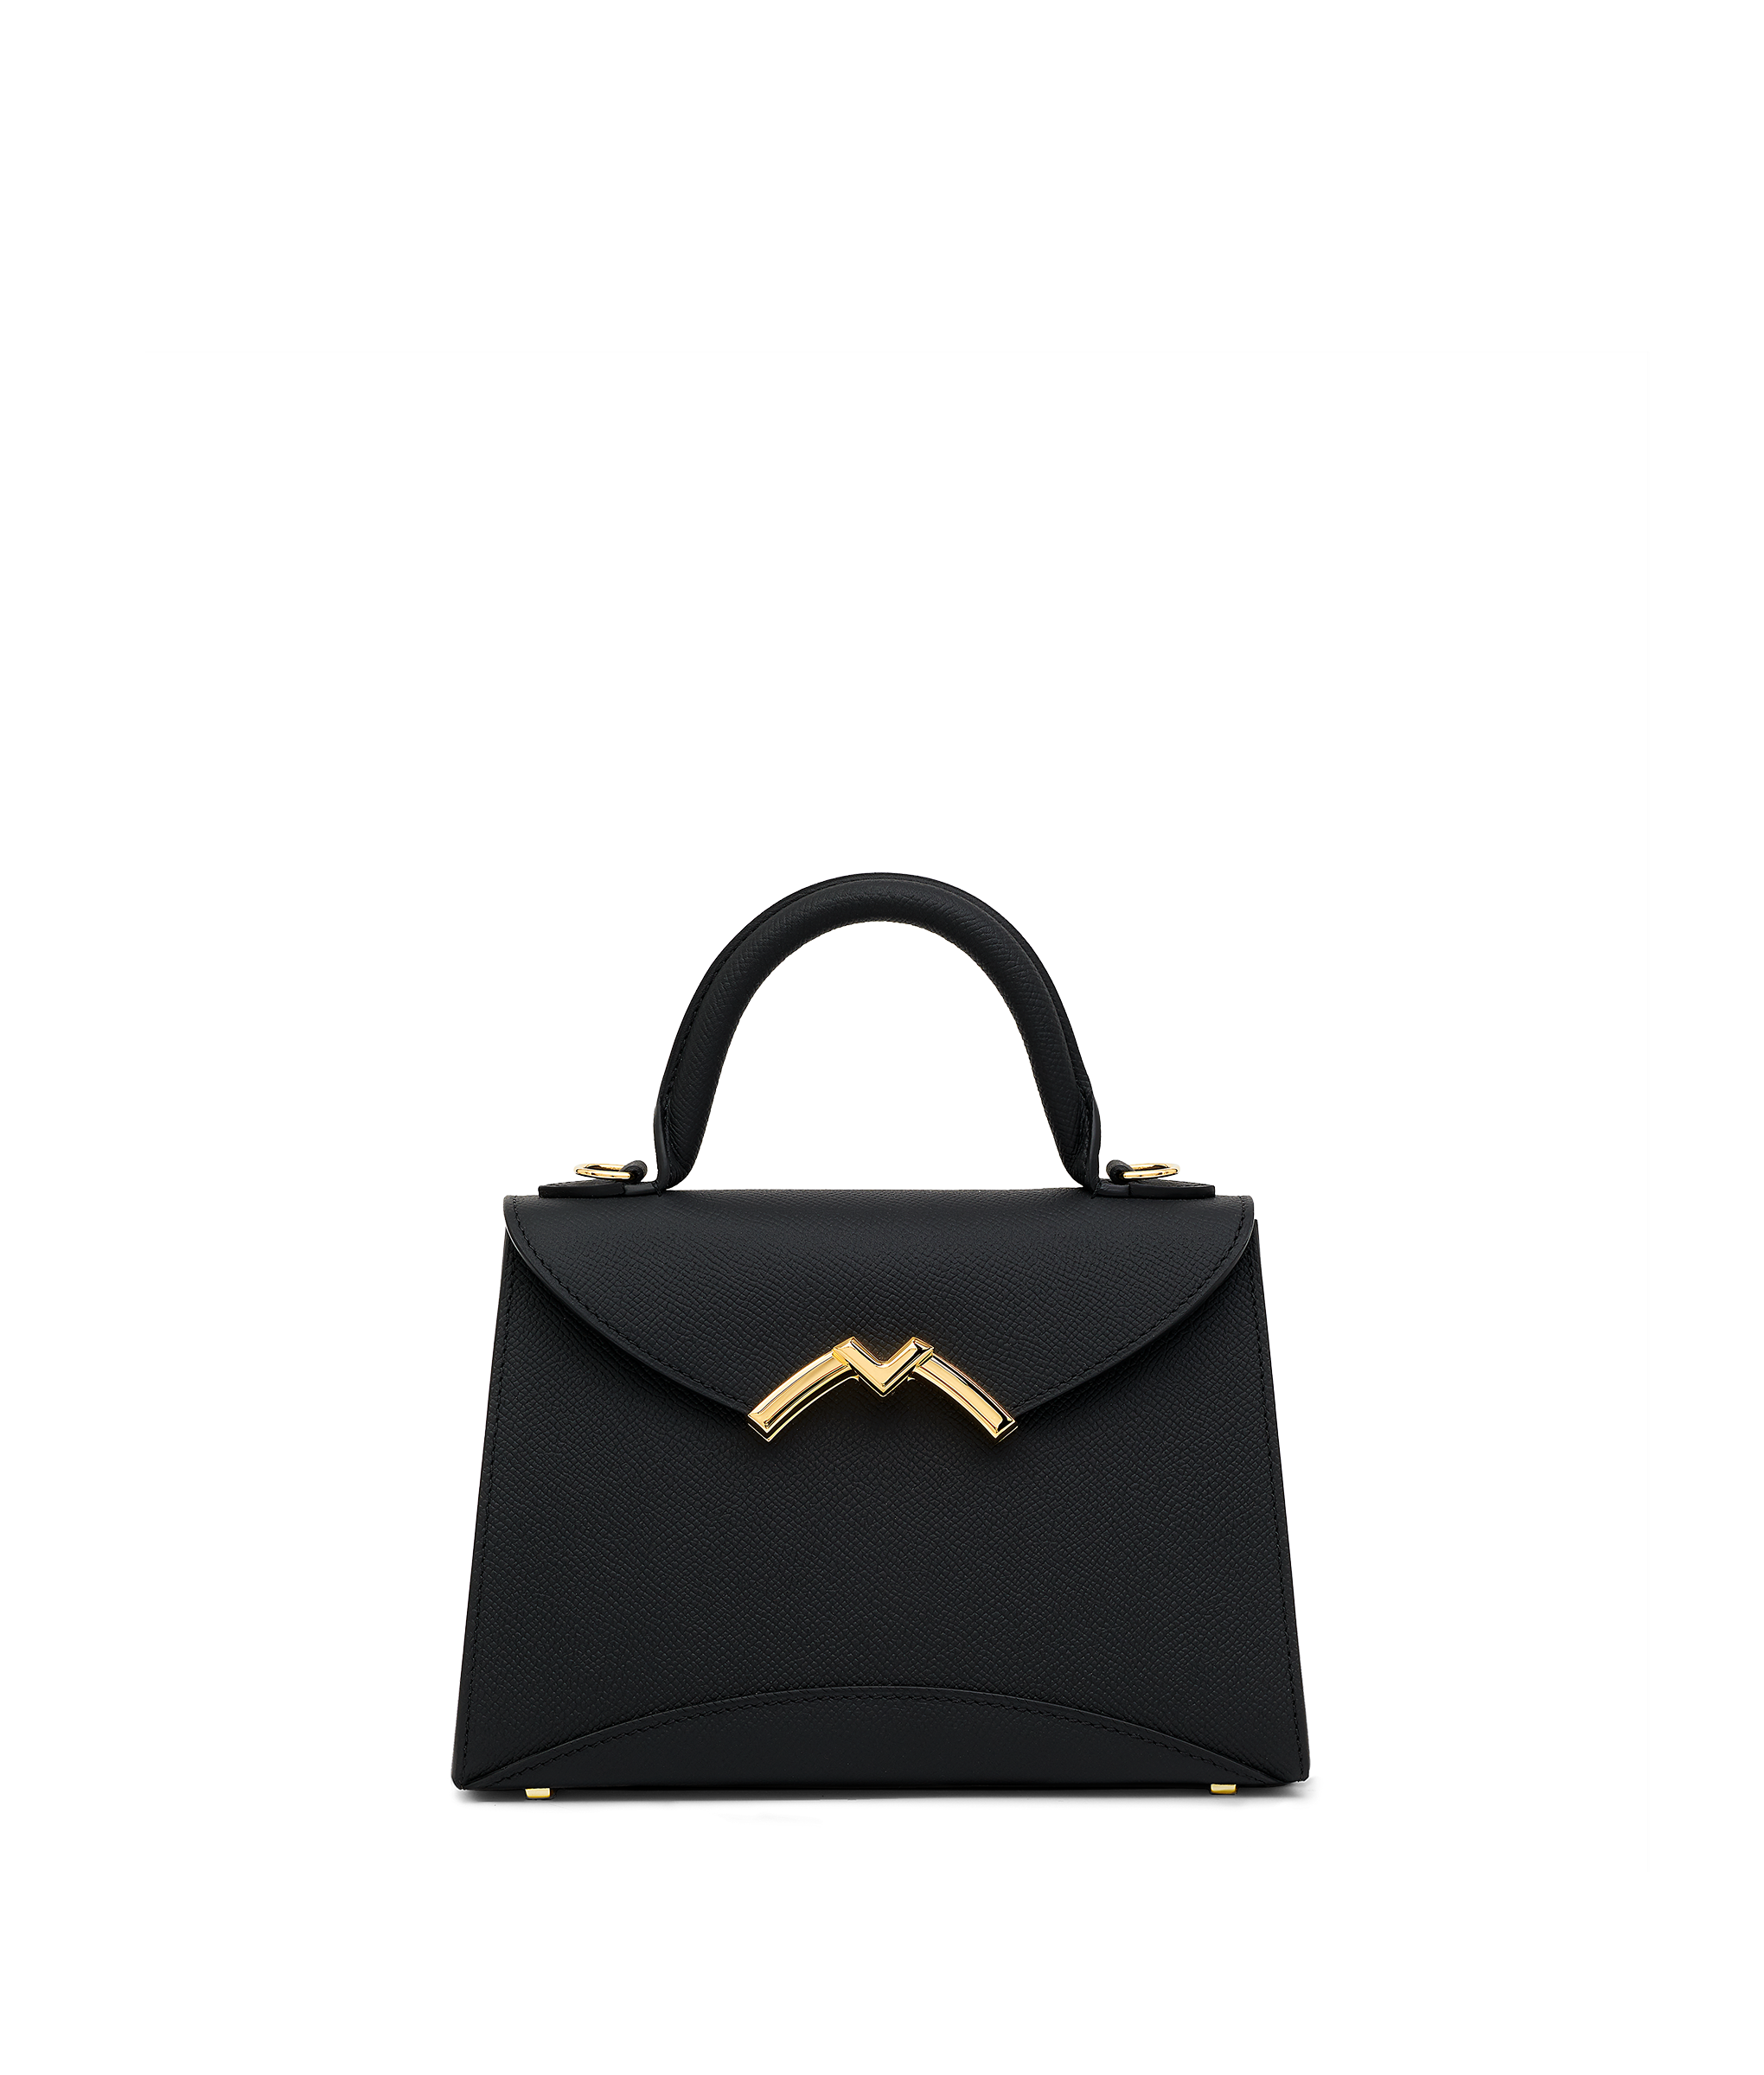 Moynat Emerald Carat Calf Leather Gabrielle PM Gold Hardware Available For  Immediate Sale At Sotheby's